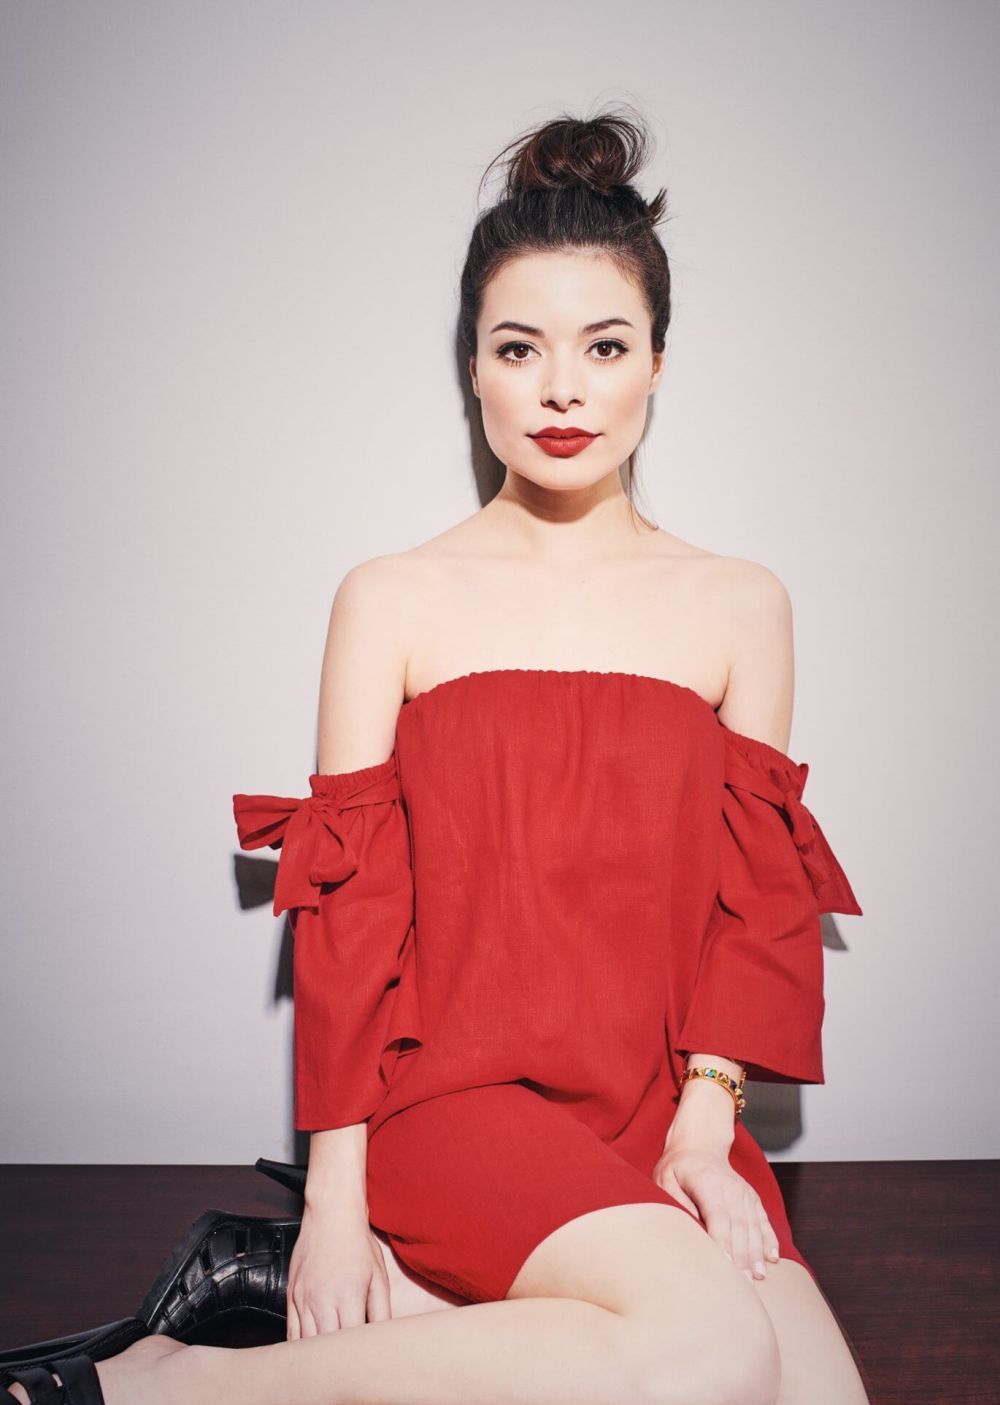 49 Miranda Cosgrove Nude Pictures Which Are Sure To Keep You Charmed With Her Charisma 46